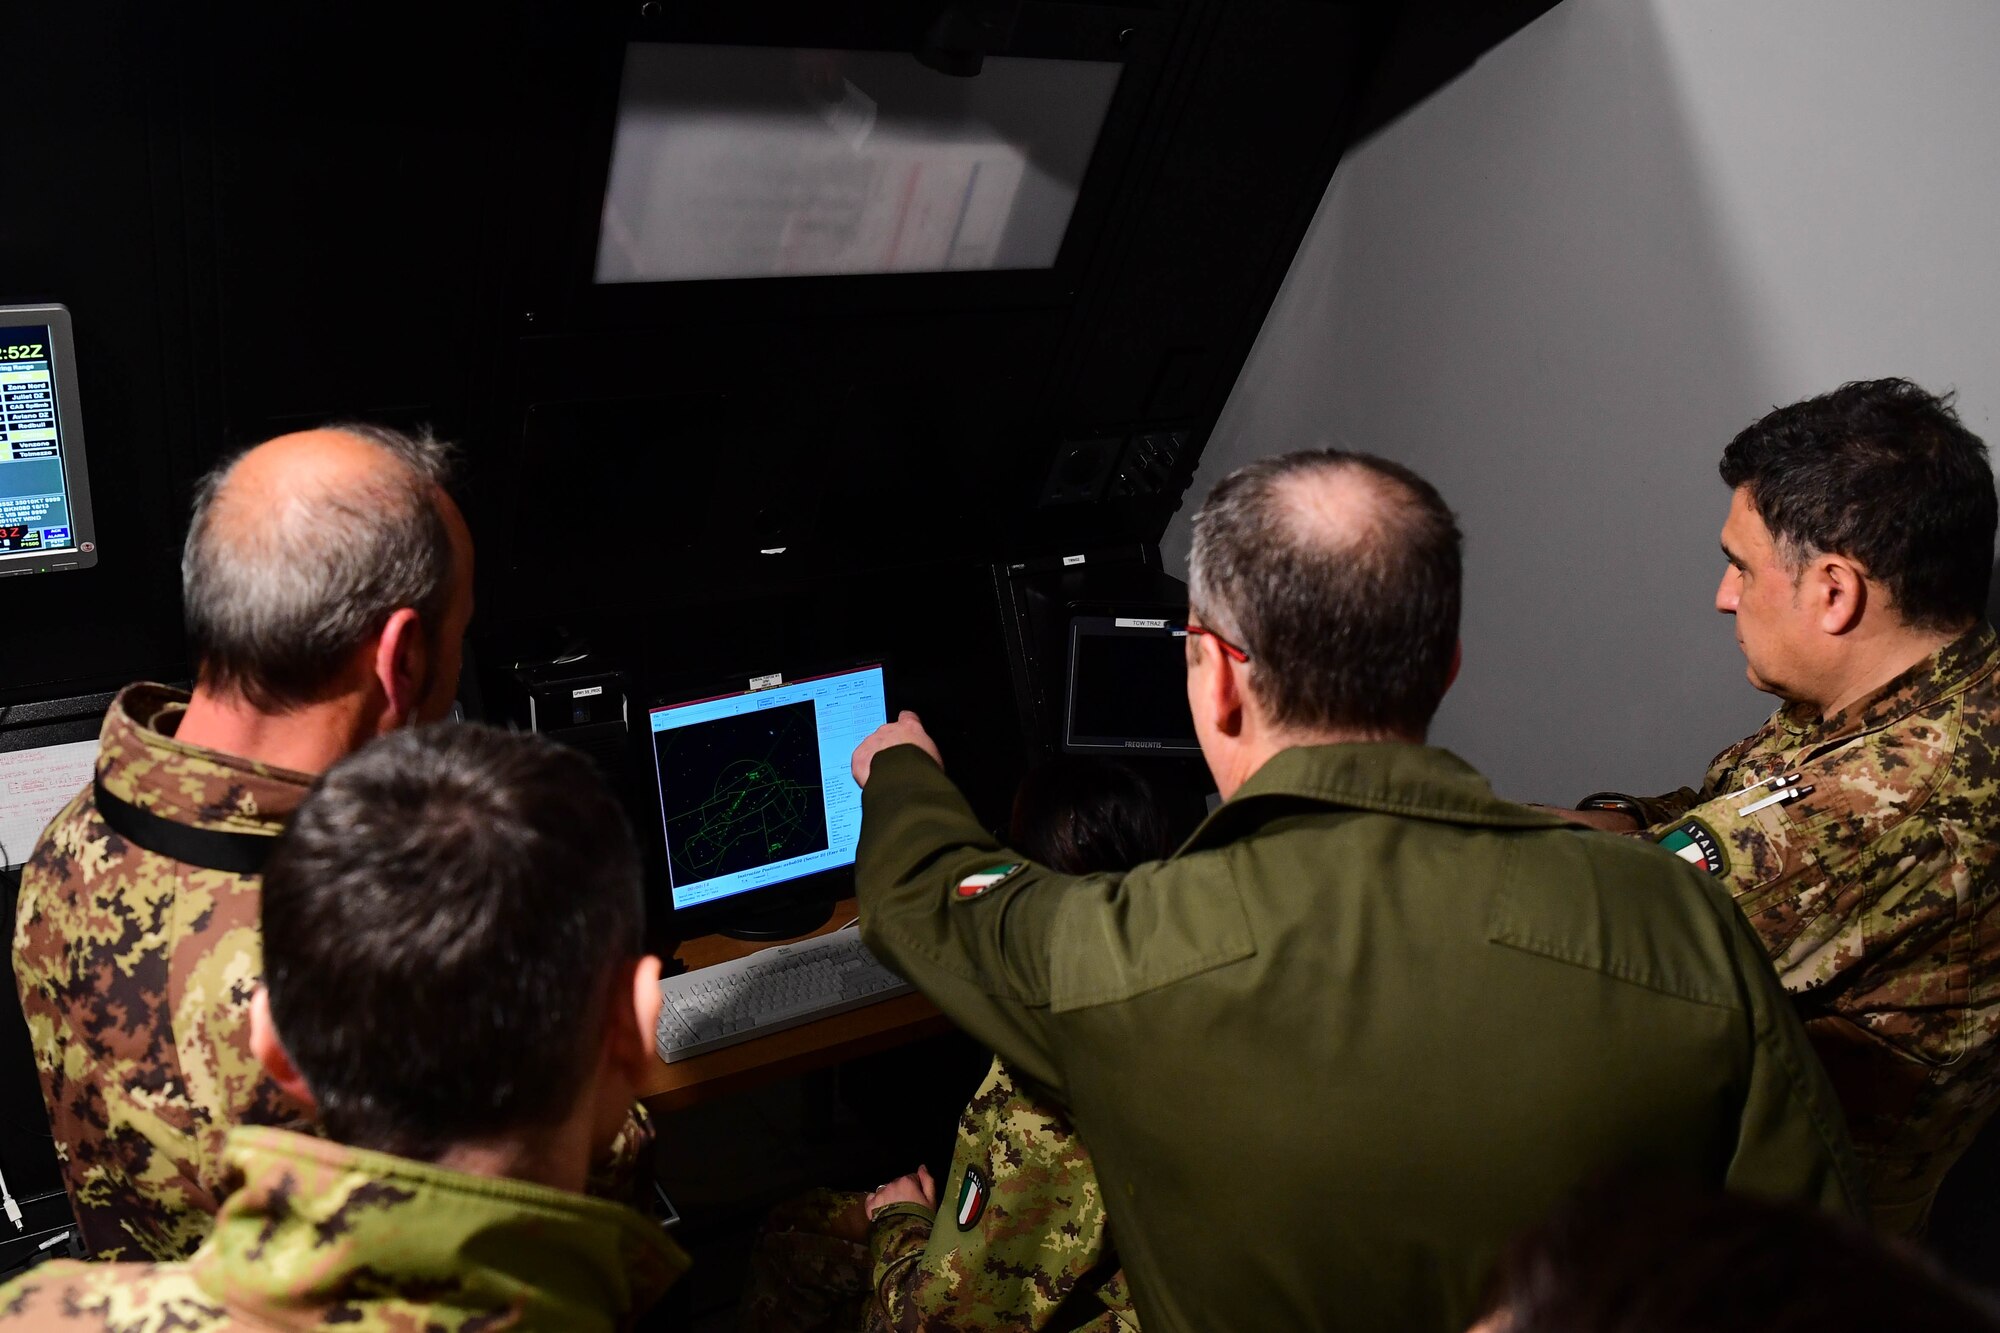 An Italian Air Force member points to a computer